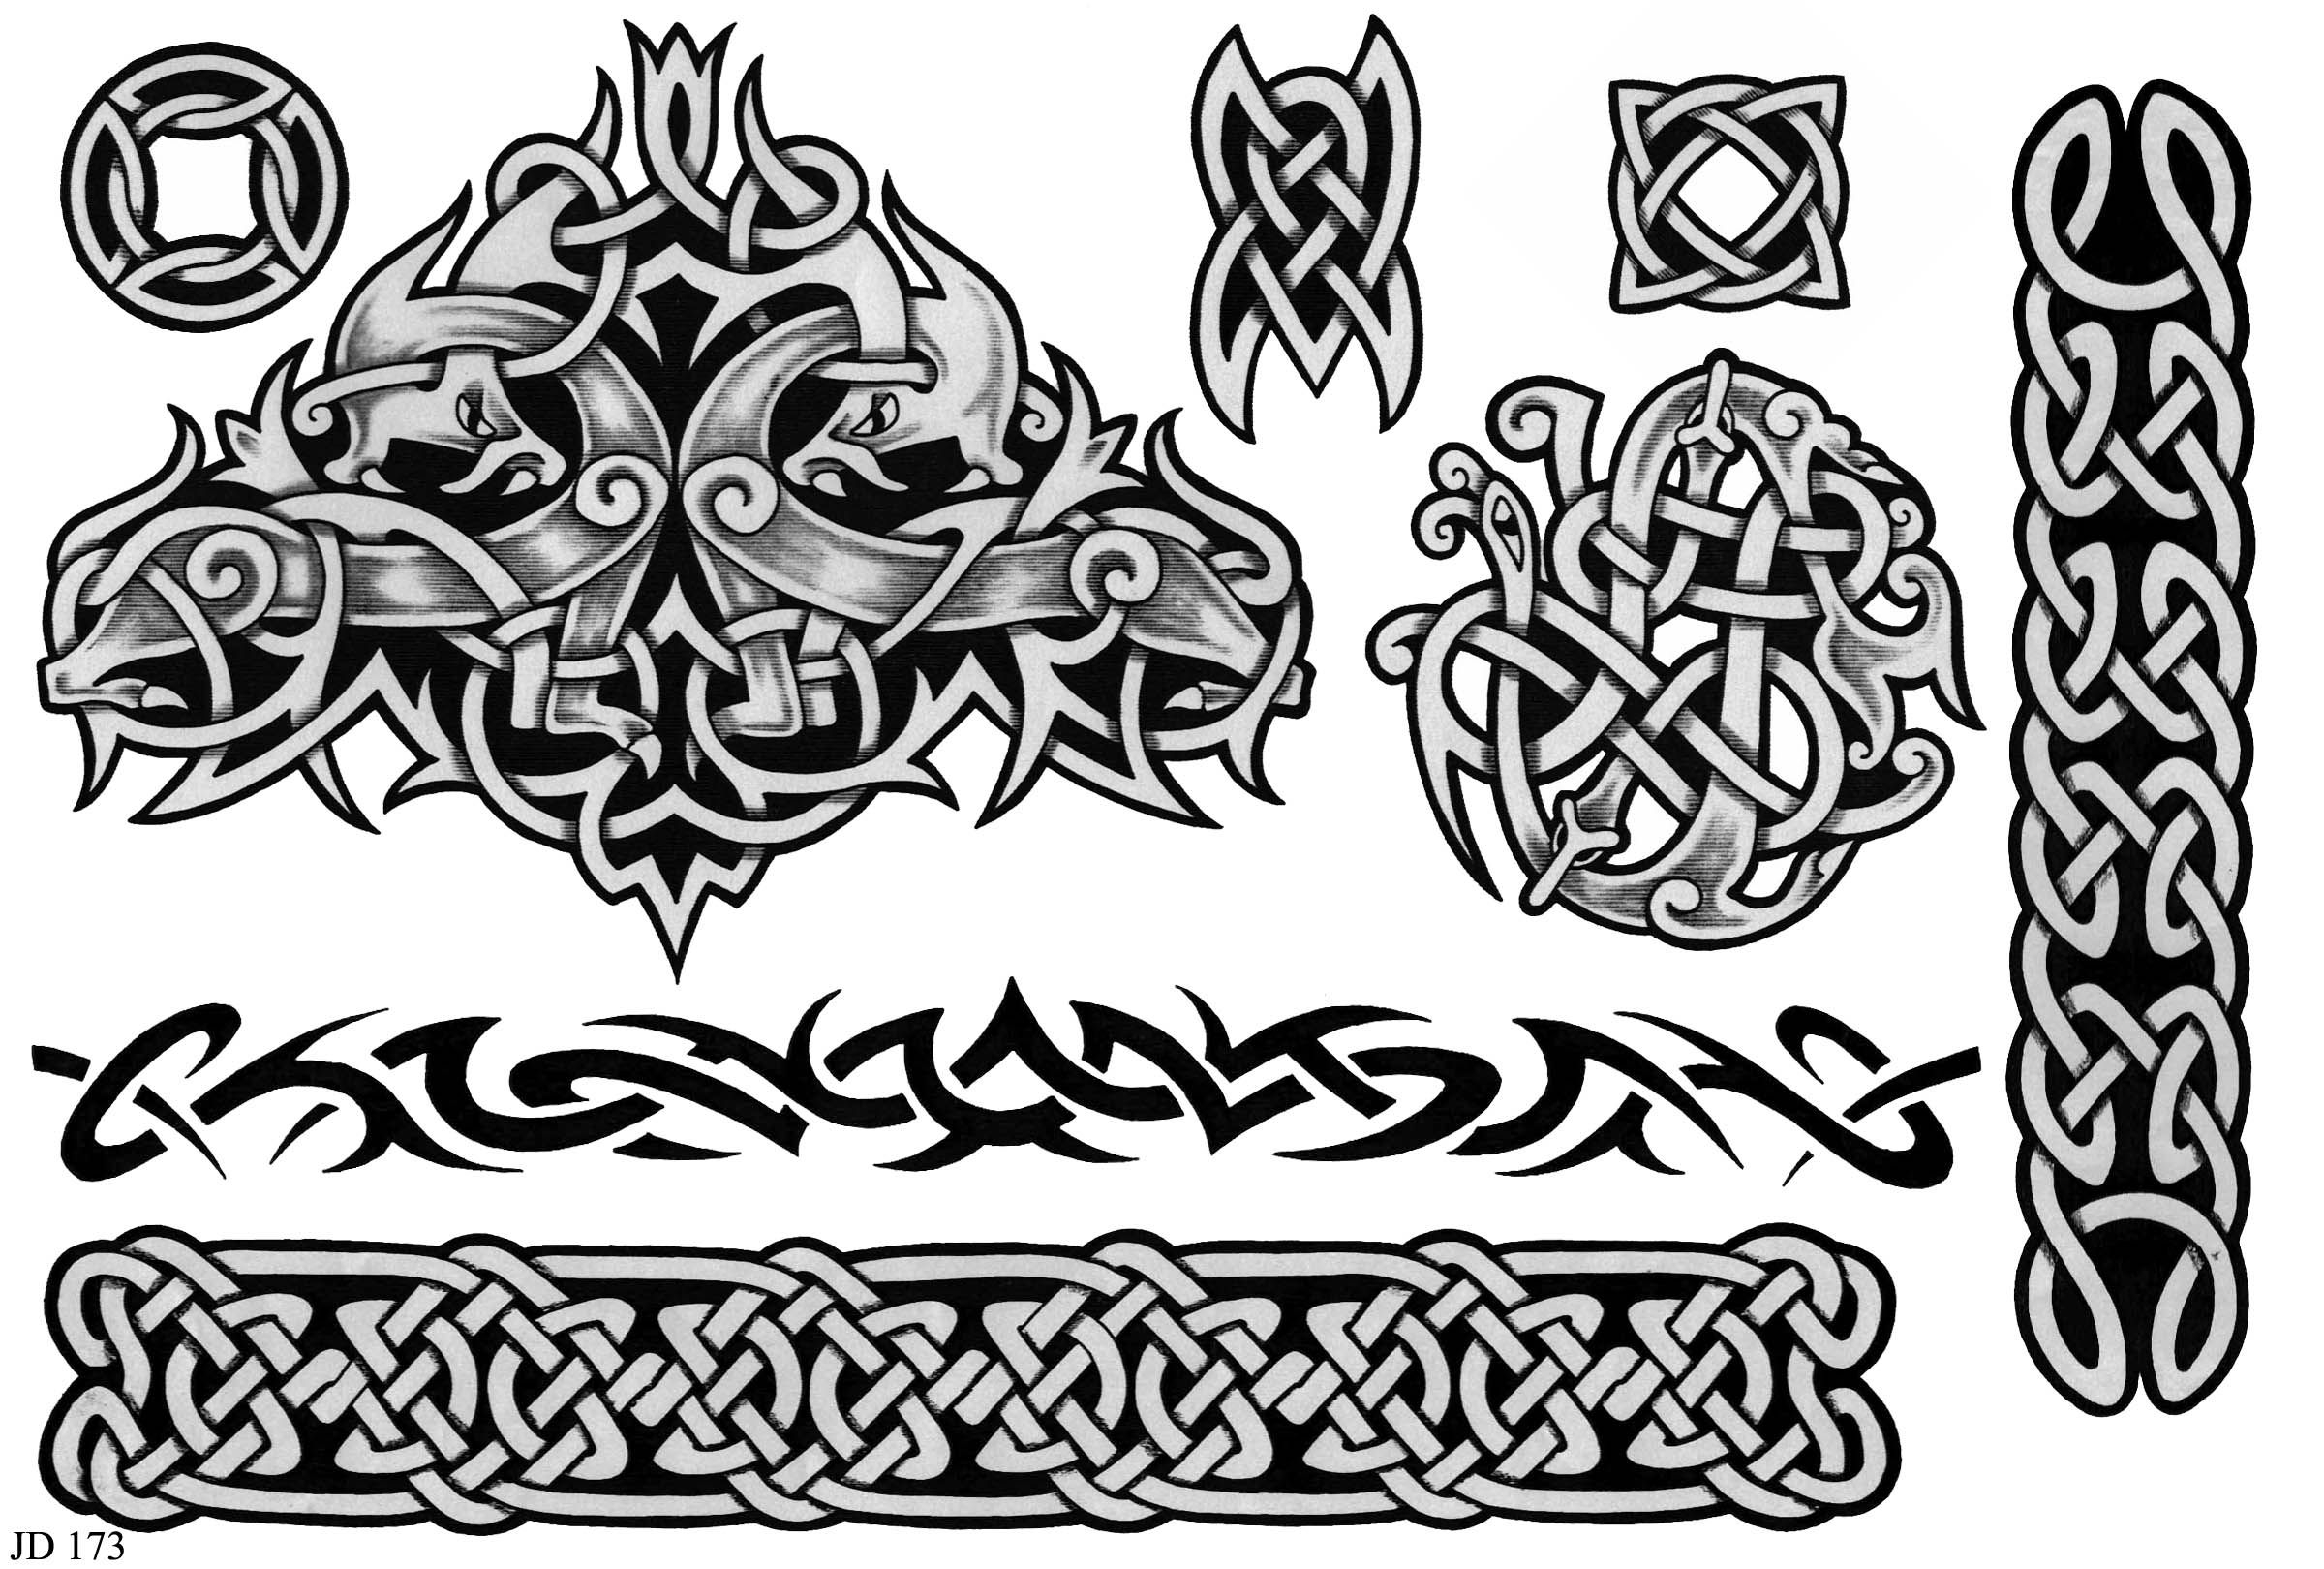 You Can Add This Tattoo To Your Tattoo Box For Later Review Or within sizing 2400 X 1620